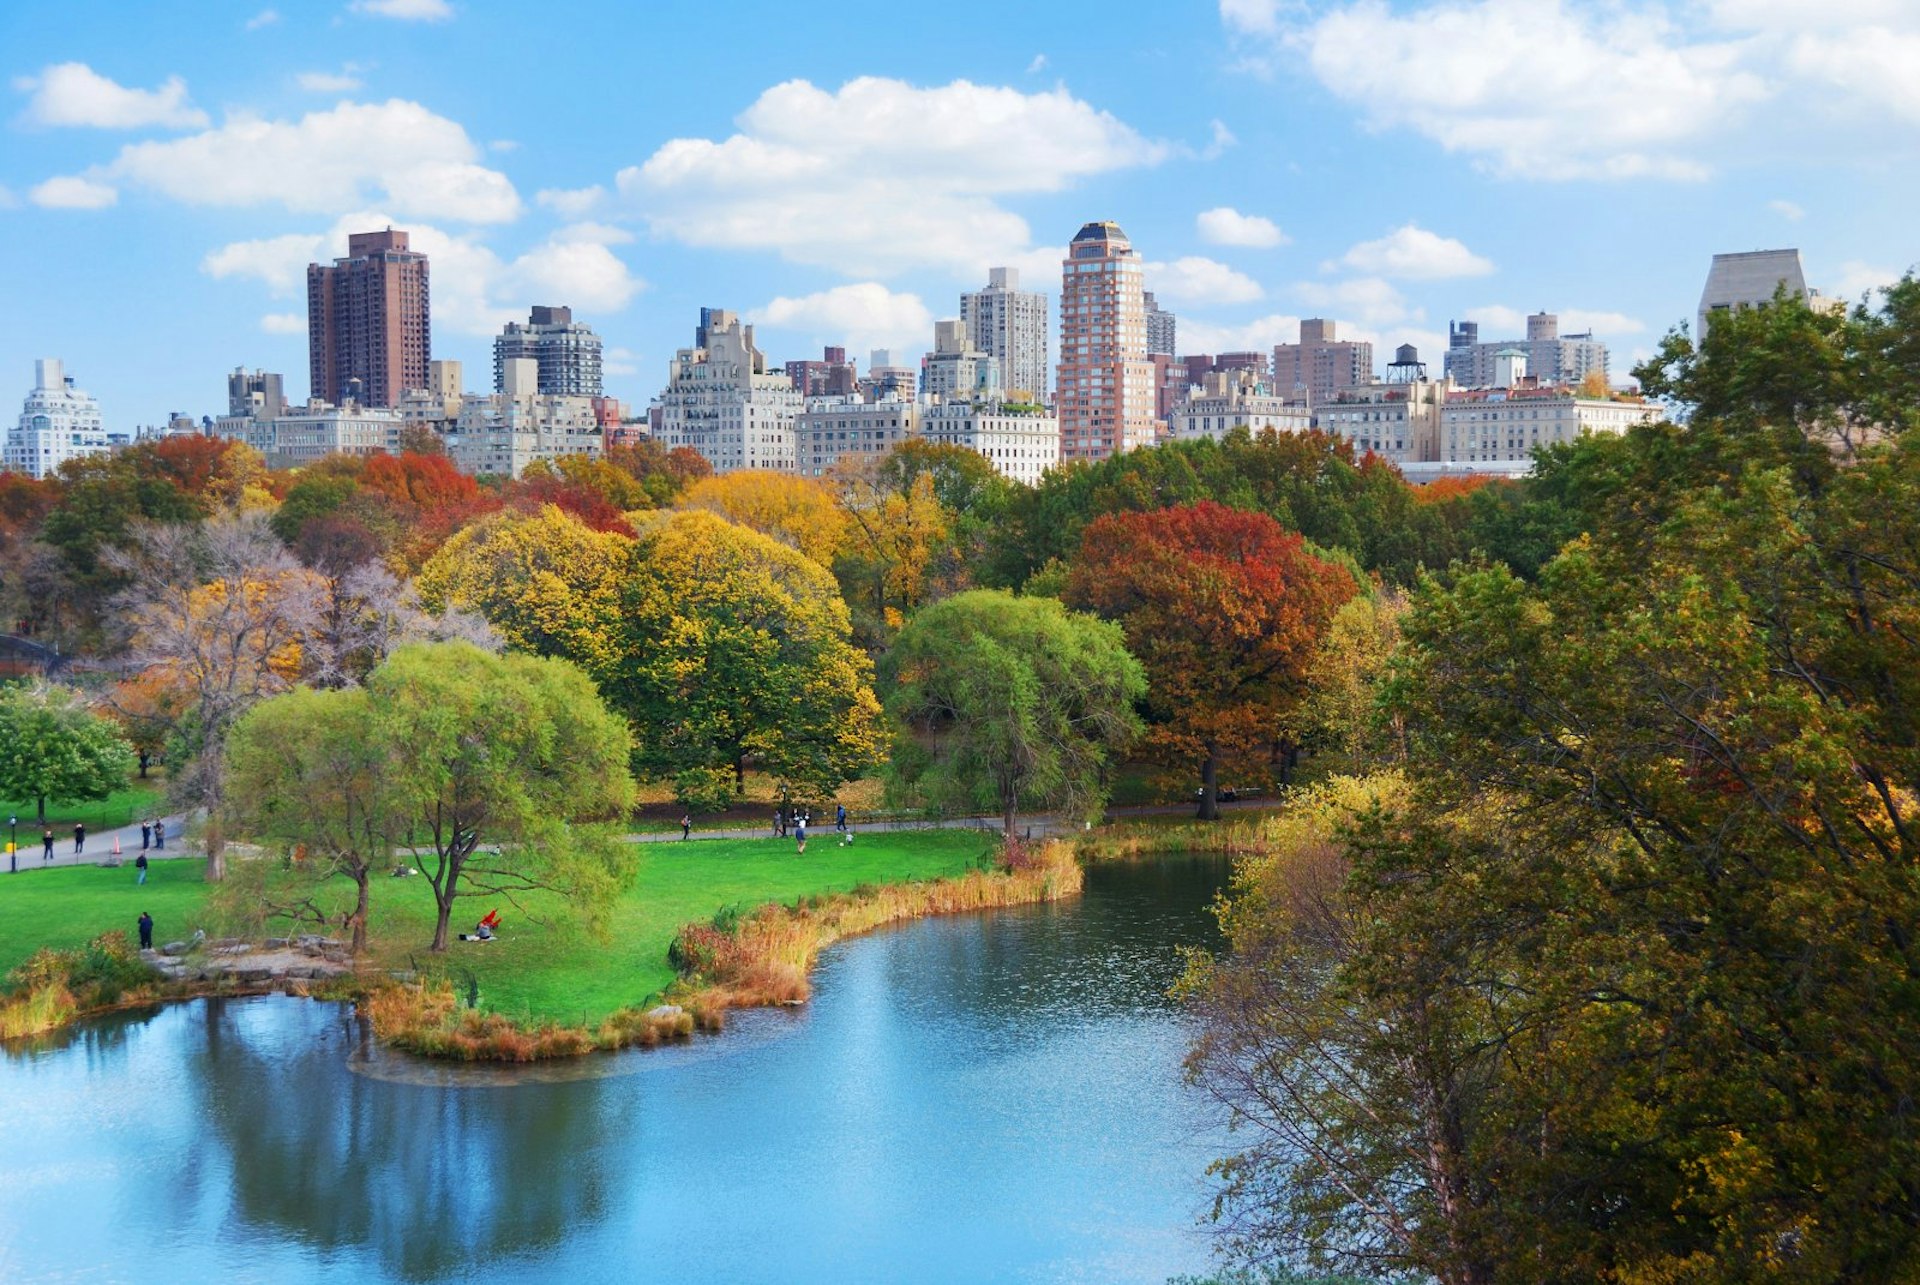 Trees with leaves of yellow, red, brown and green are around a lake in Central Park. Manhattan is seen in the background